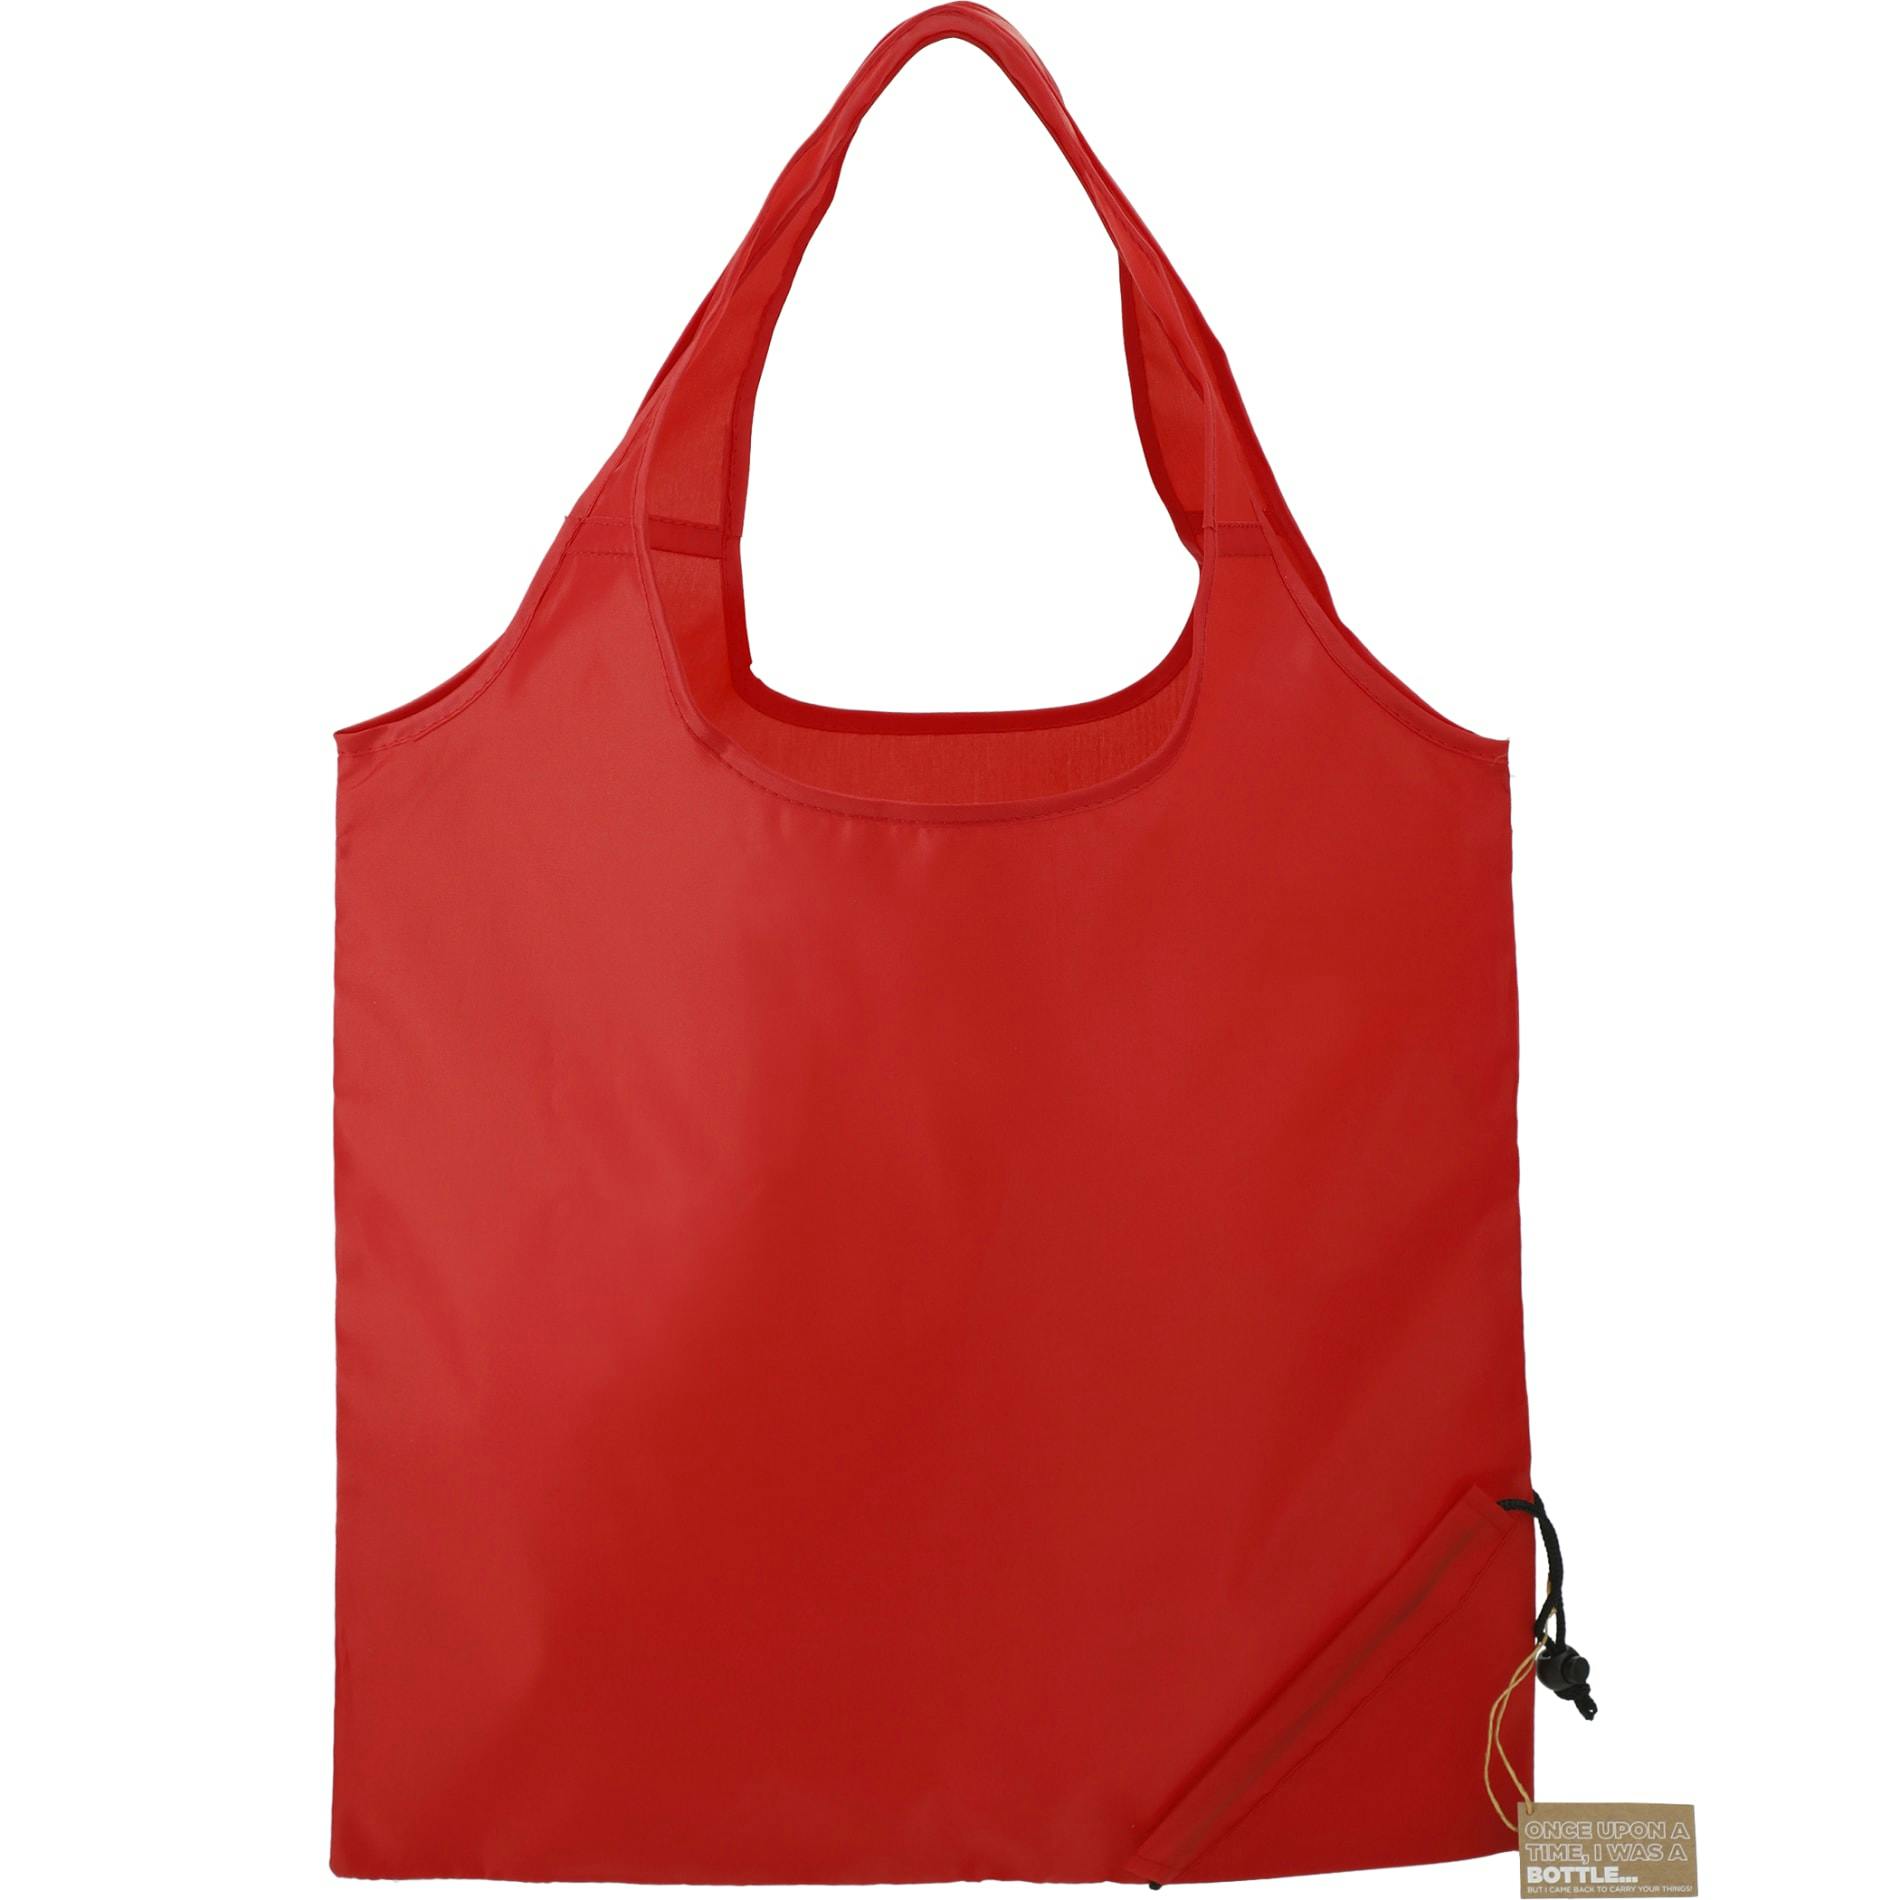 Bungalow RPET Foldable Shopper Tote - additional Image 1